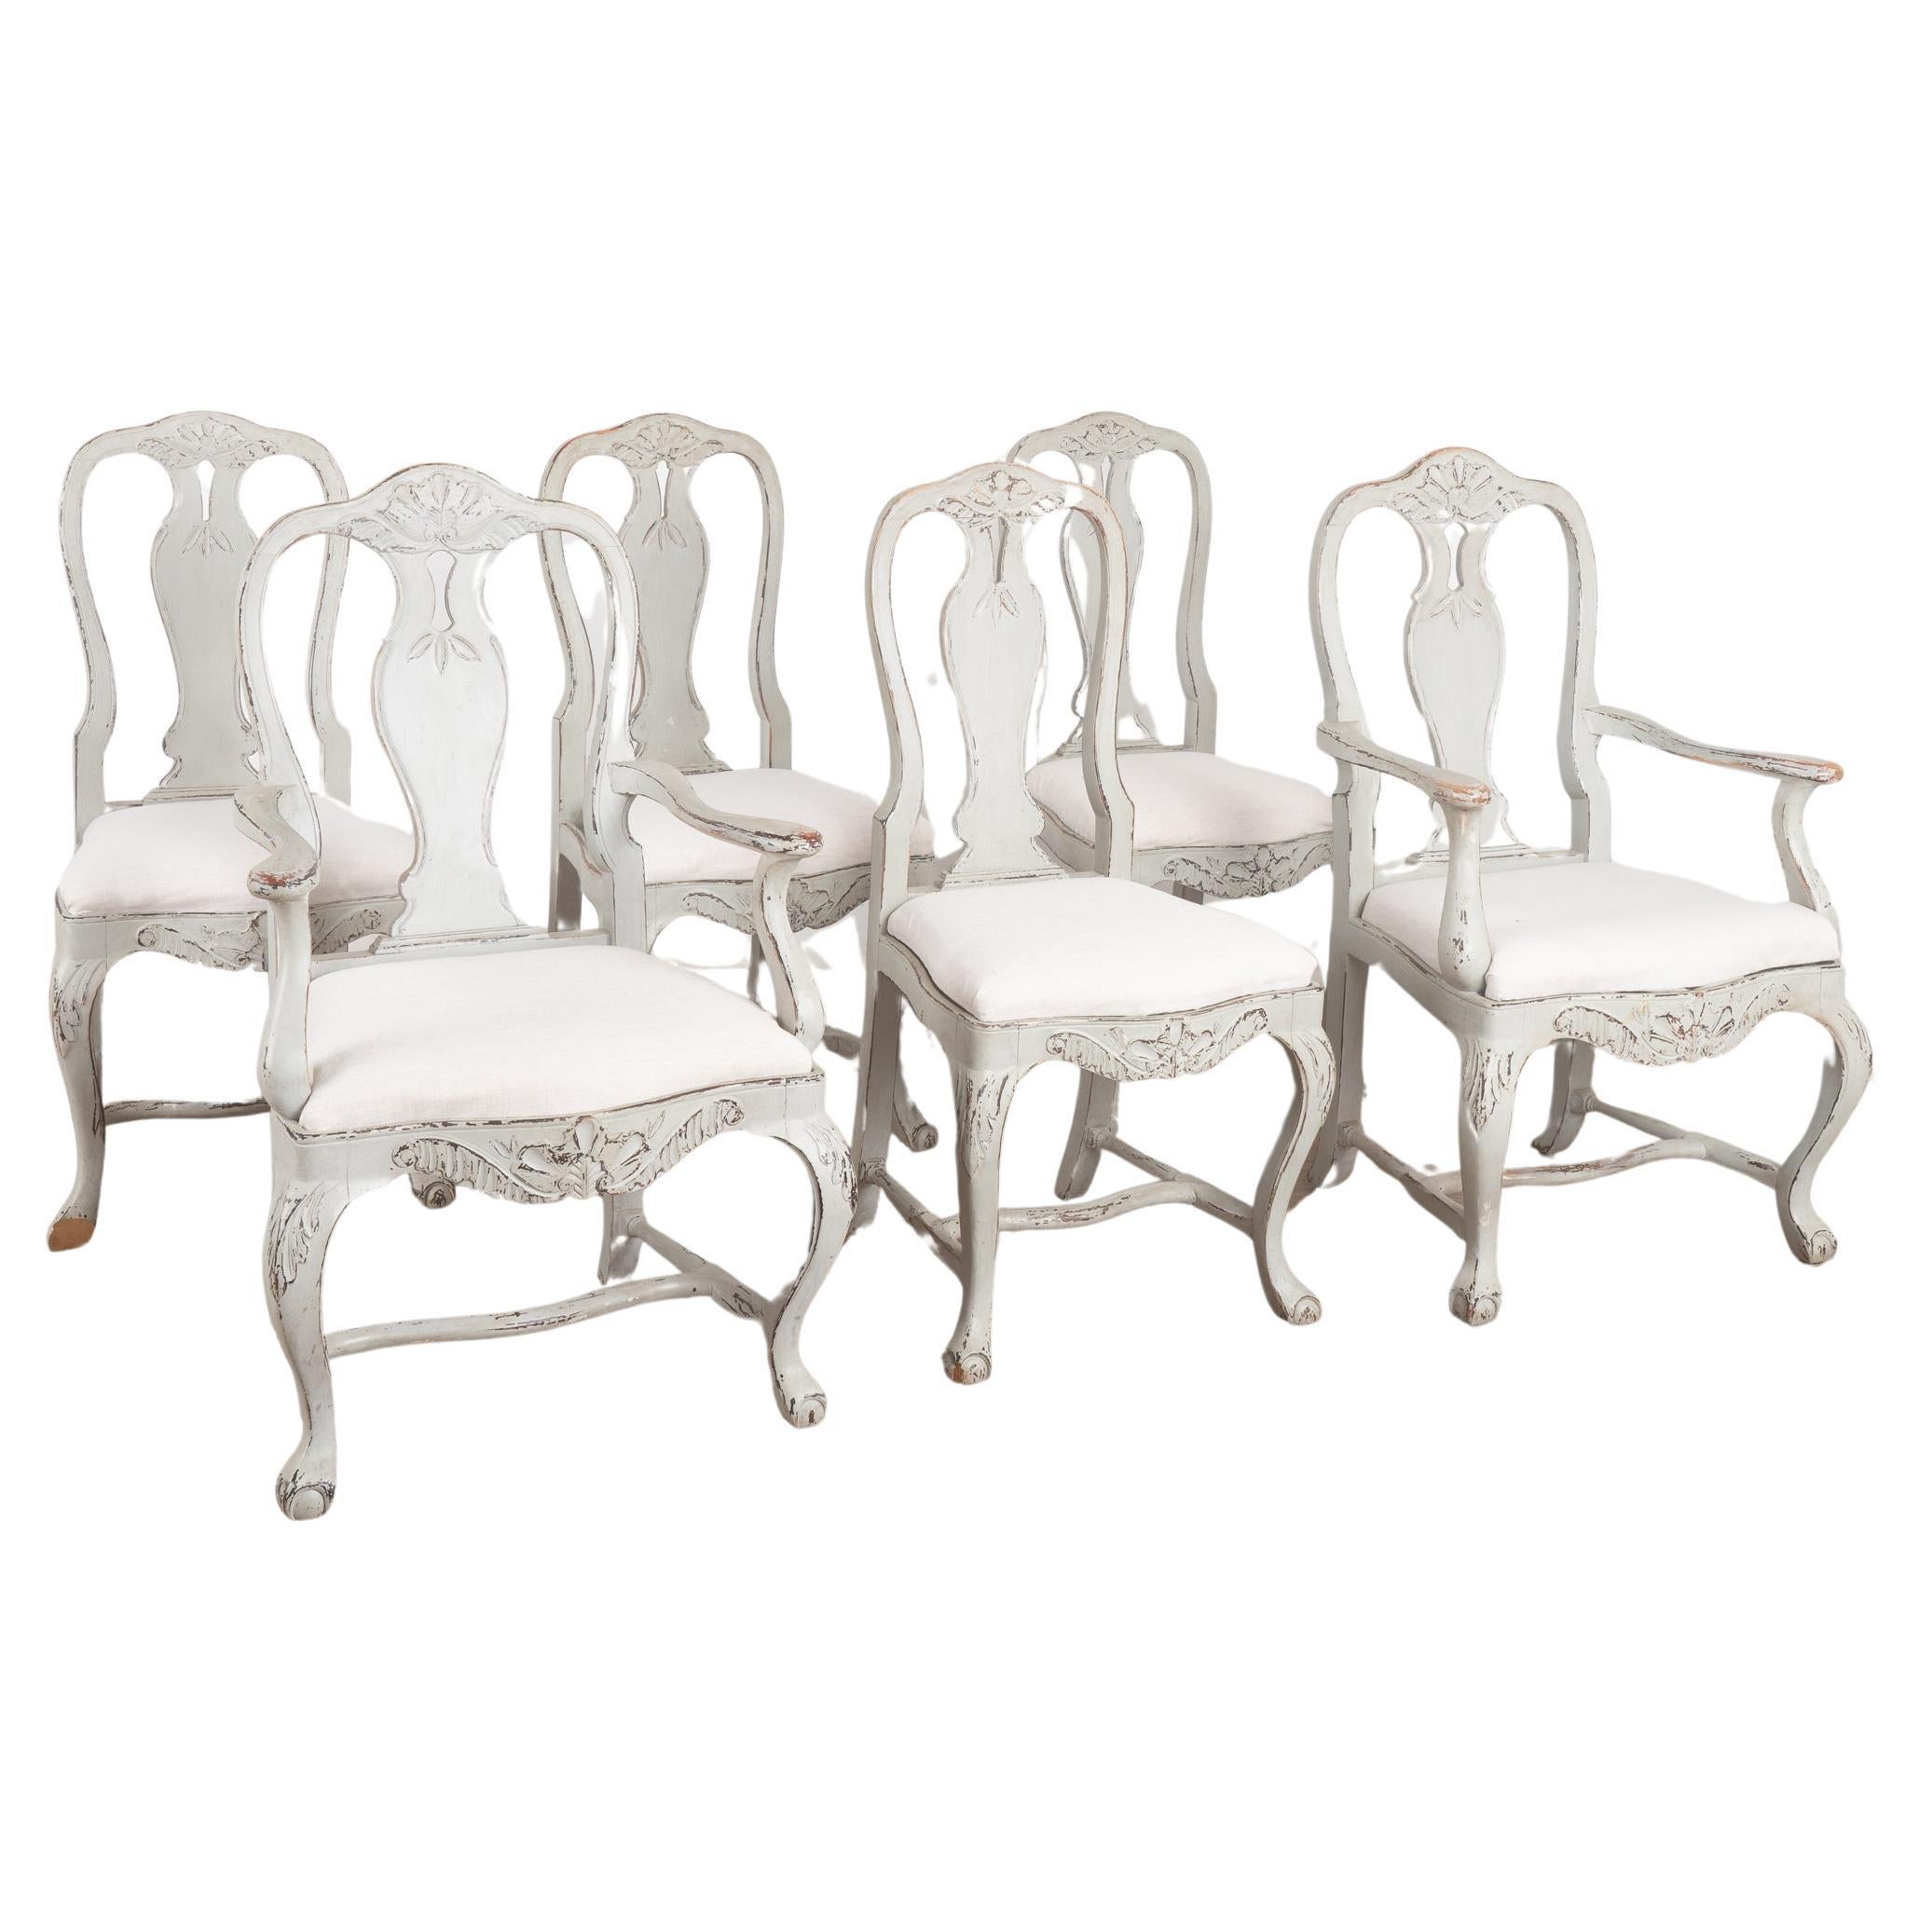 Set of Six Antique Swedish Rococo Dining Chairs With Gray Paint, circa 1880